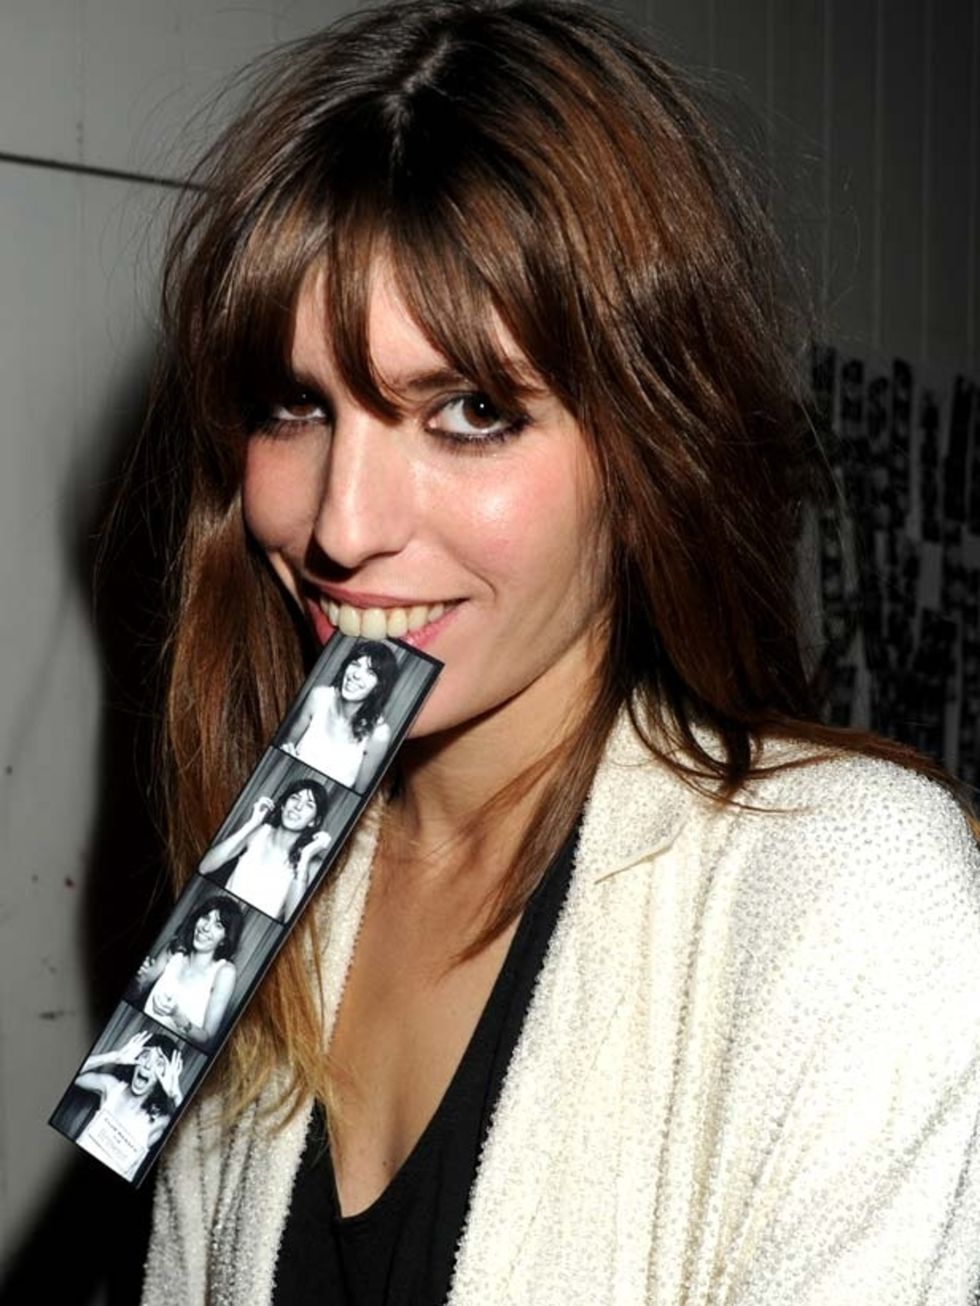 <p><a href="http://www.elleuk.com/starstyle/style-files/%28section%29/lou-doillon/%28offset%29/0/%28img%29/696765">Lou Doillon</a> at the launch of Club Monaco for Browns at the Royal Academy of Arts in London, 9 February 2011 </p>